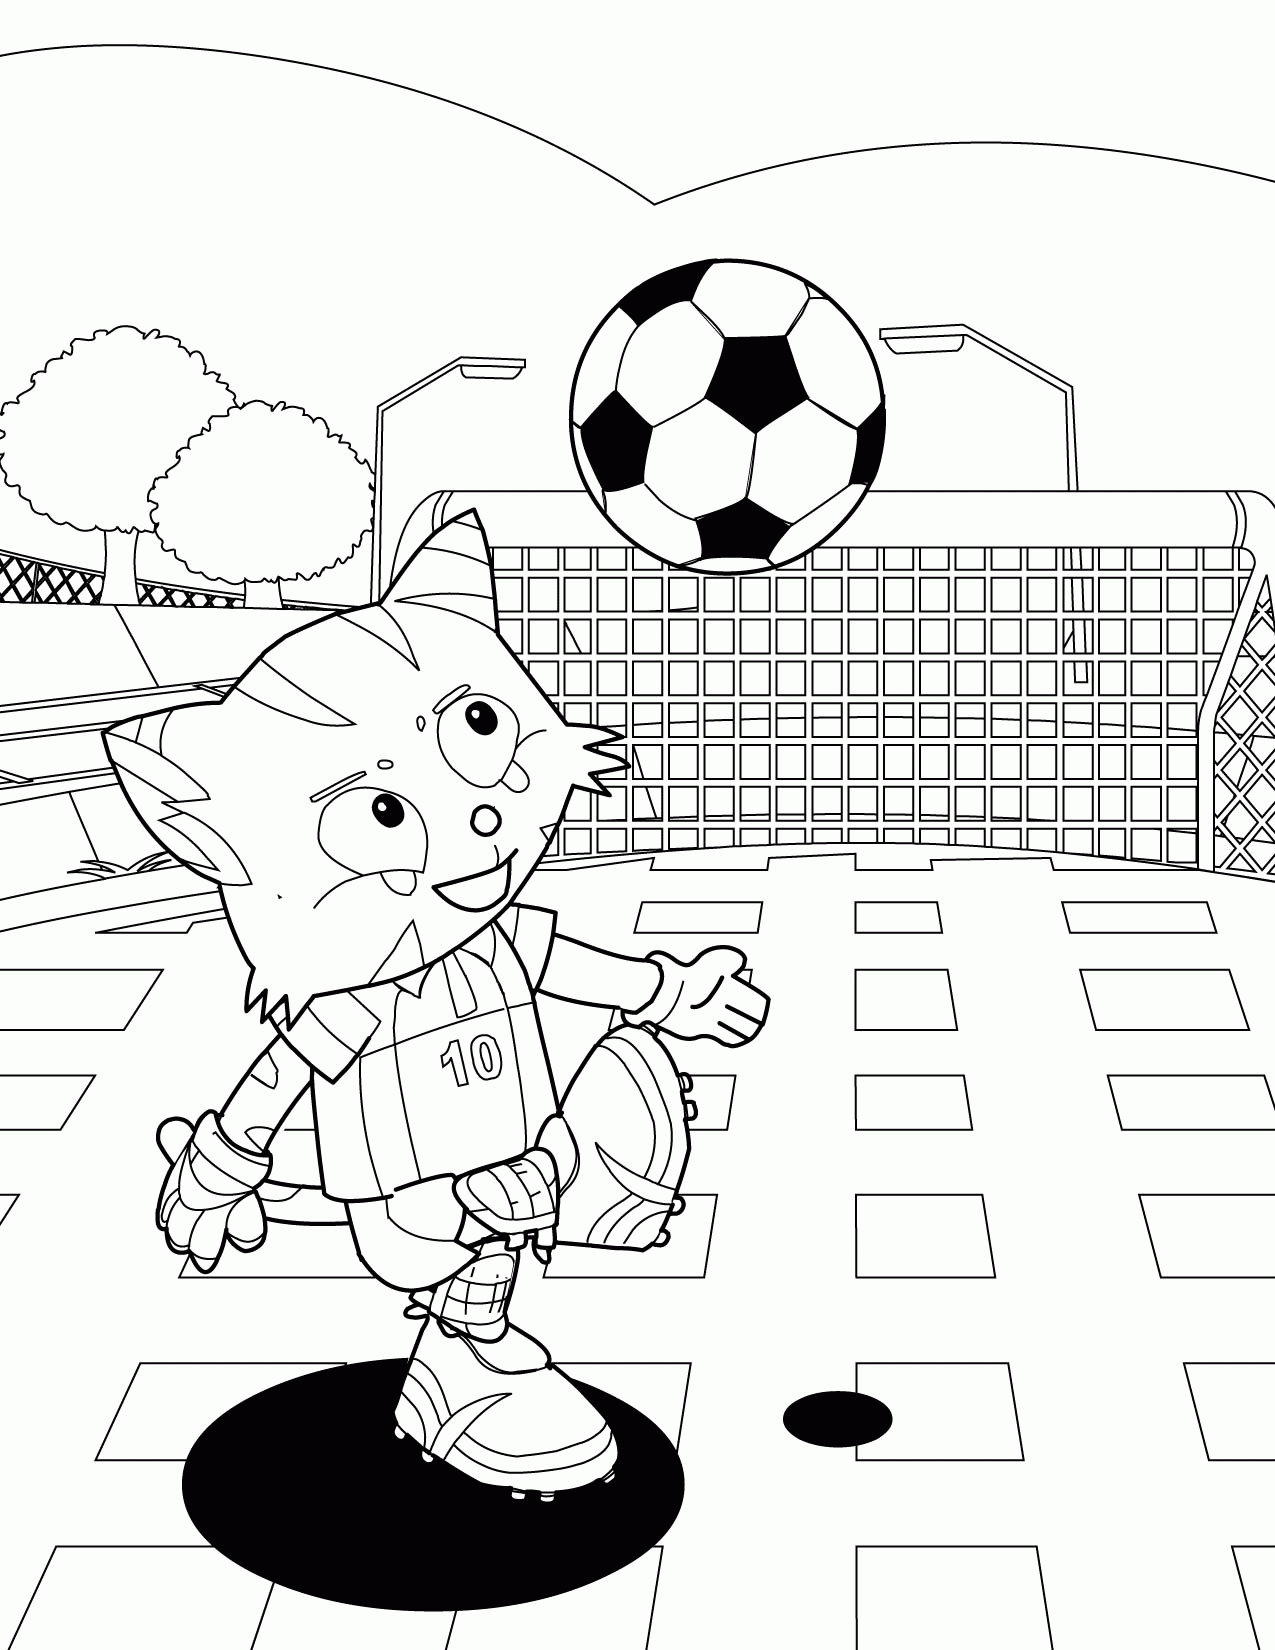 Soccer Coloring Page - Handipoints